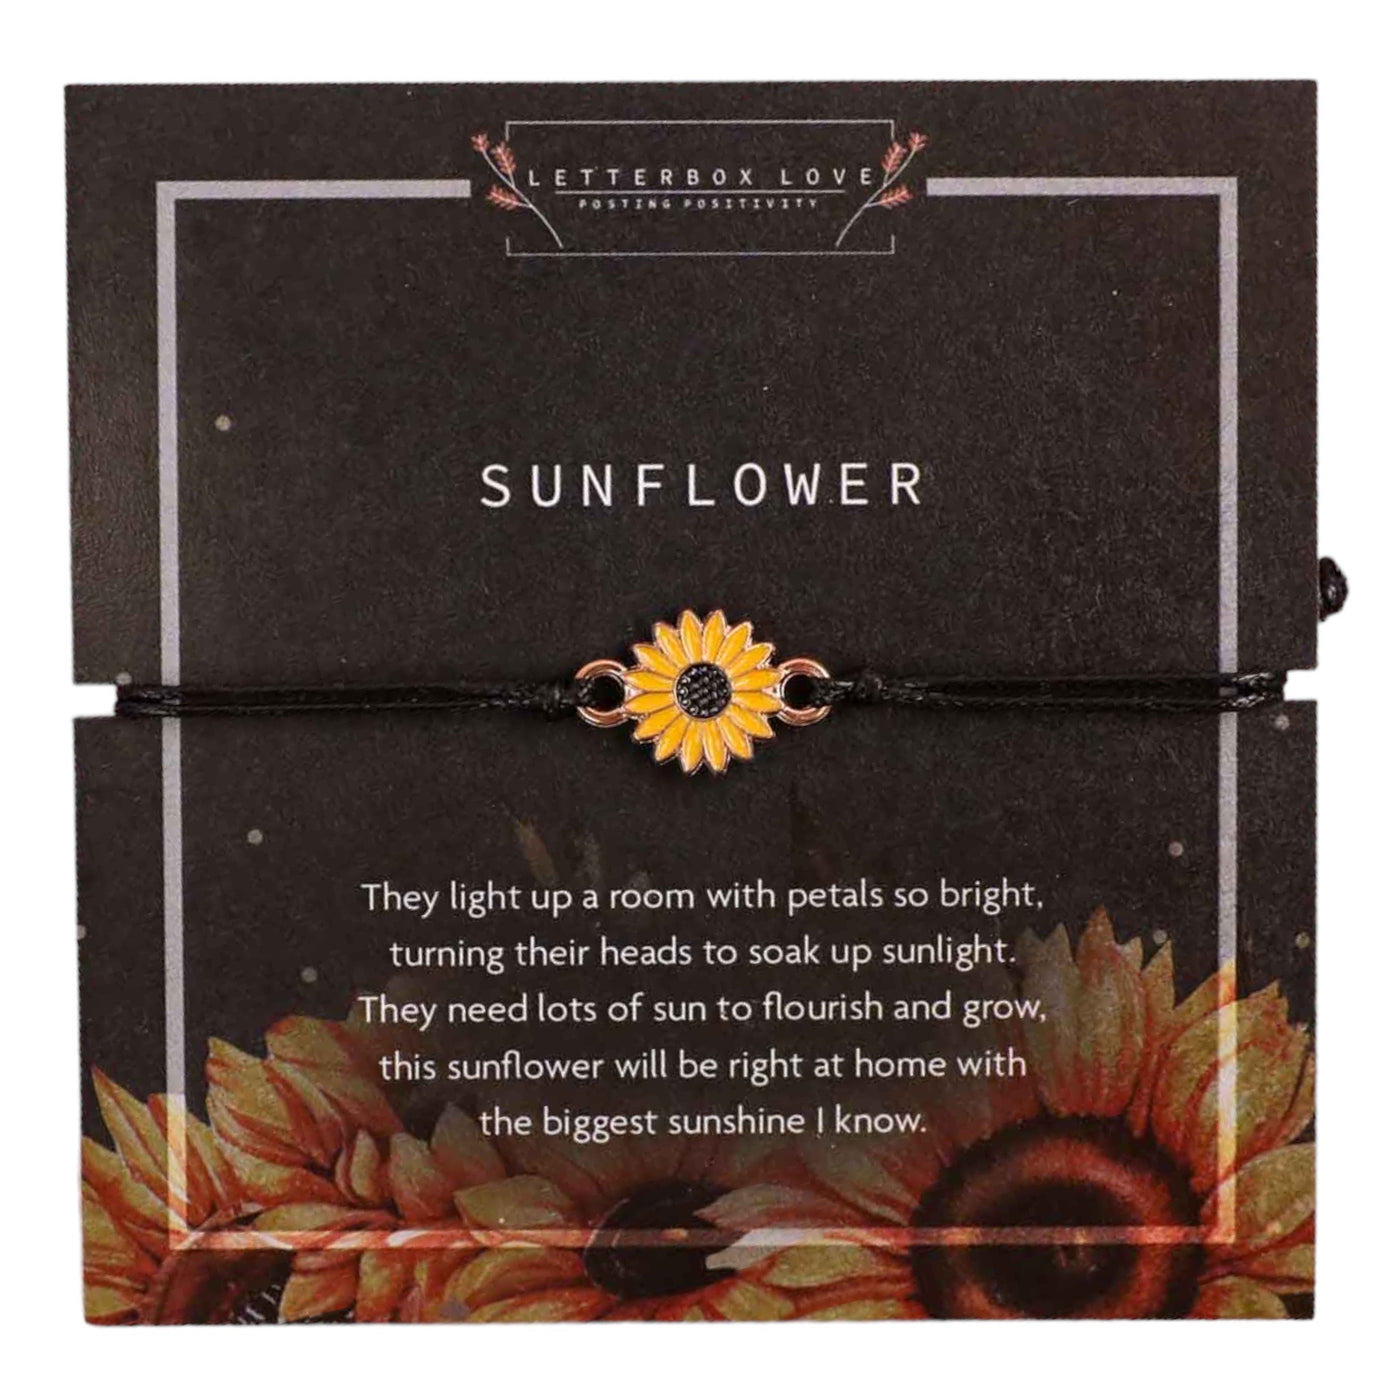 A black cord bracelet with a vibrant, enameled sunflower charm in the center, displayed against a dark background with a sunflower design and text that reads 'SUNFLOWER.' The accompanying text on the card poetically describes the sunflower's bright presence and growth